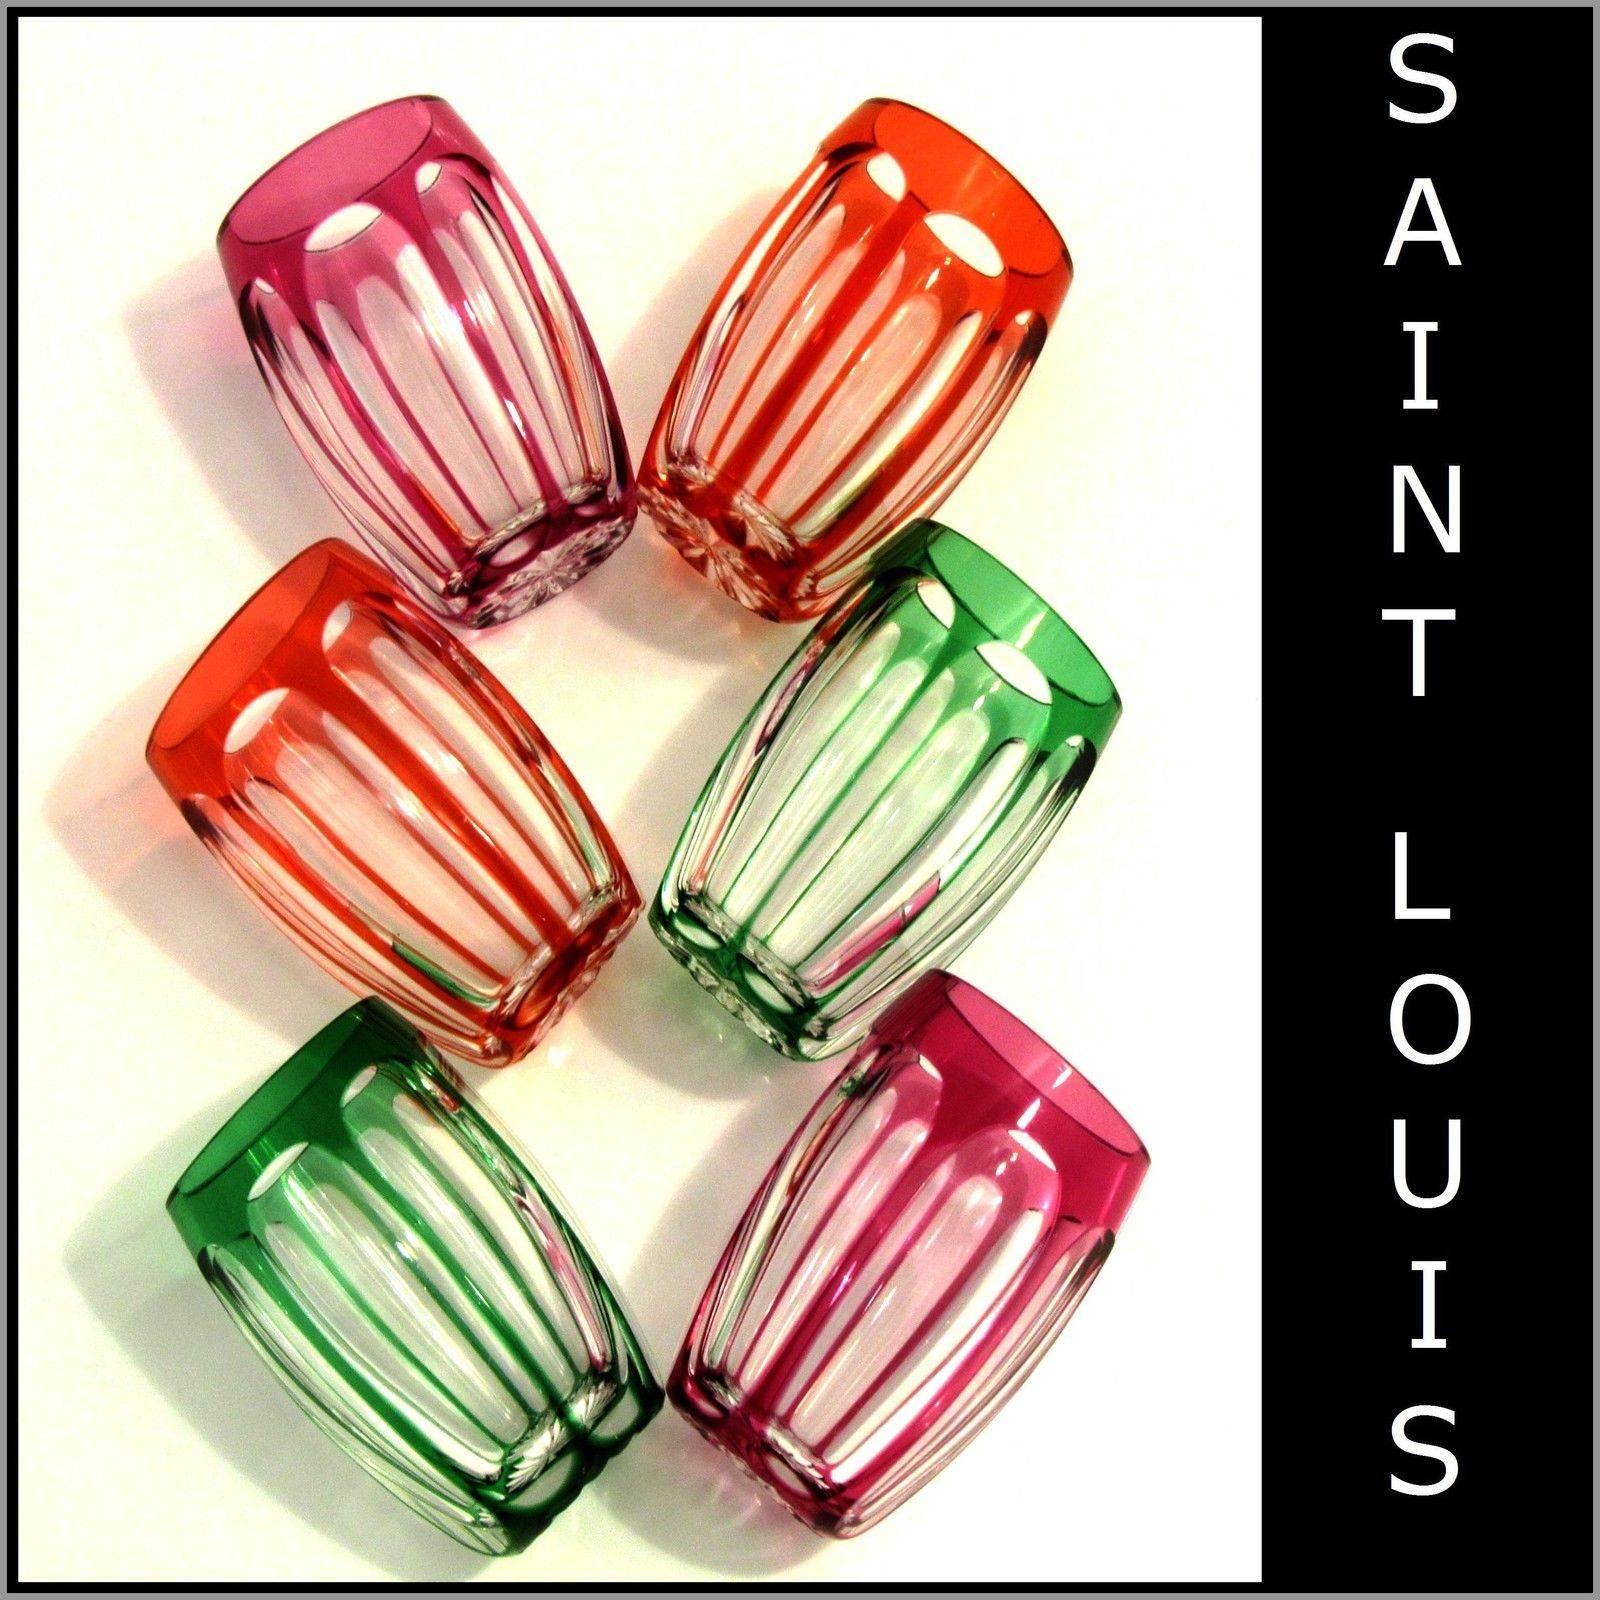 Saint Louis antique French multi-color crystal liquor or aperitif glasses six-pieces

Antique French St Louis cut crystal liquor or aperitif Glasses six-pieces, circa 1900. These pieces are unmarked, made prior to the acid etched mark first used